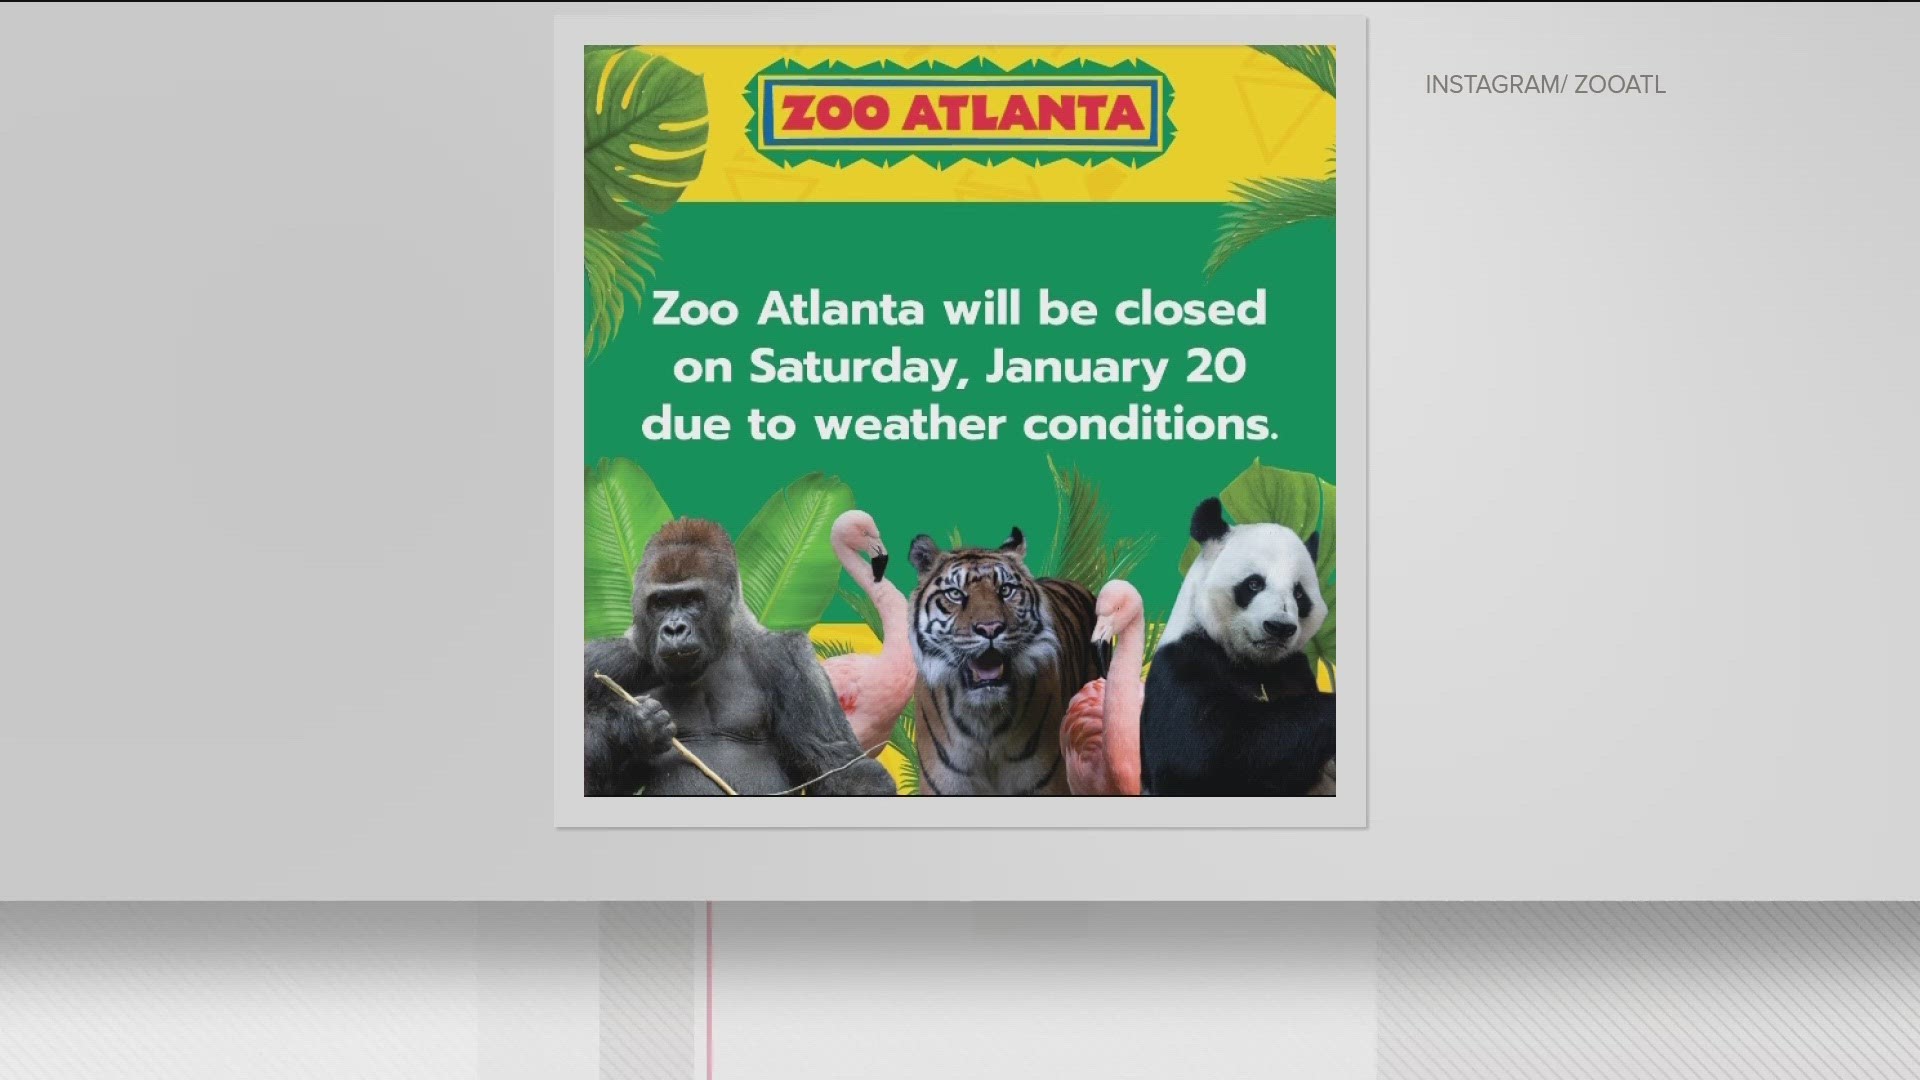 Officials say animal care won't be impacted, but the zoo will remain closed to visitors.